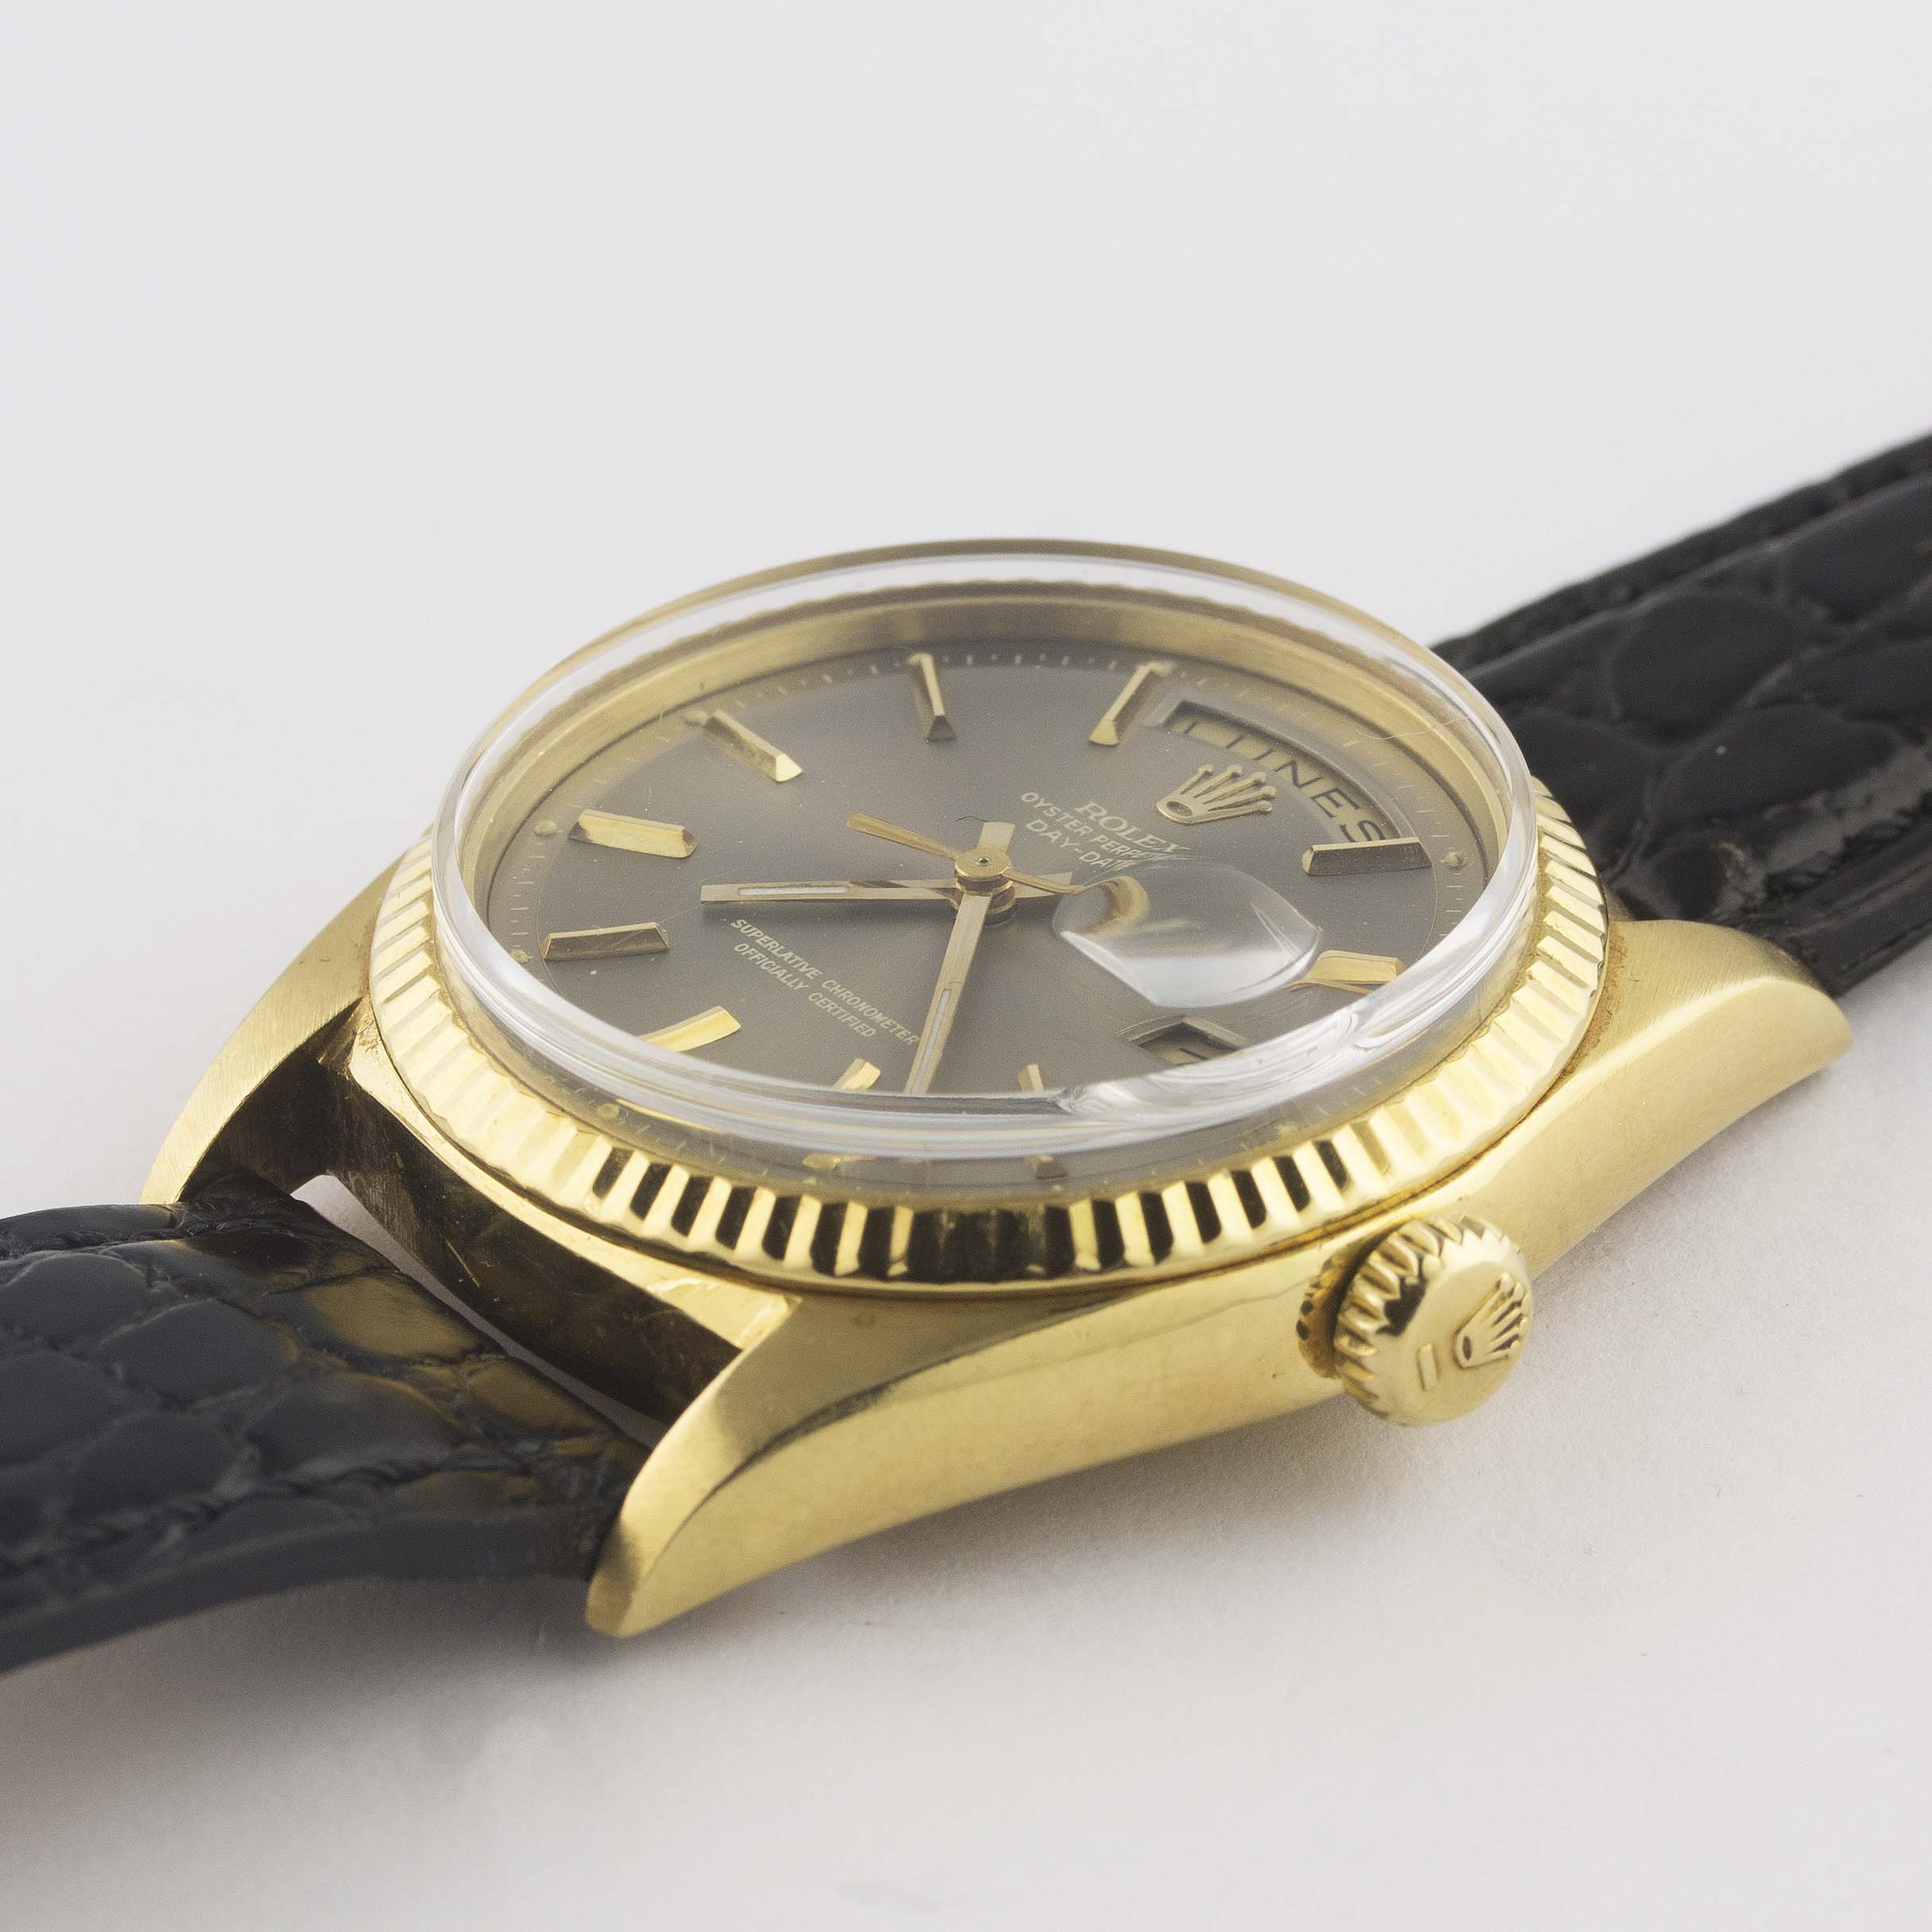 A RARE GENTLEMAN'S 18K SOLID GOLD ROLEX OYSTER PERPETUAL DAY DATE WRIST WATCH CIRCA 1972, REF. - Image 3 of 11